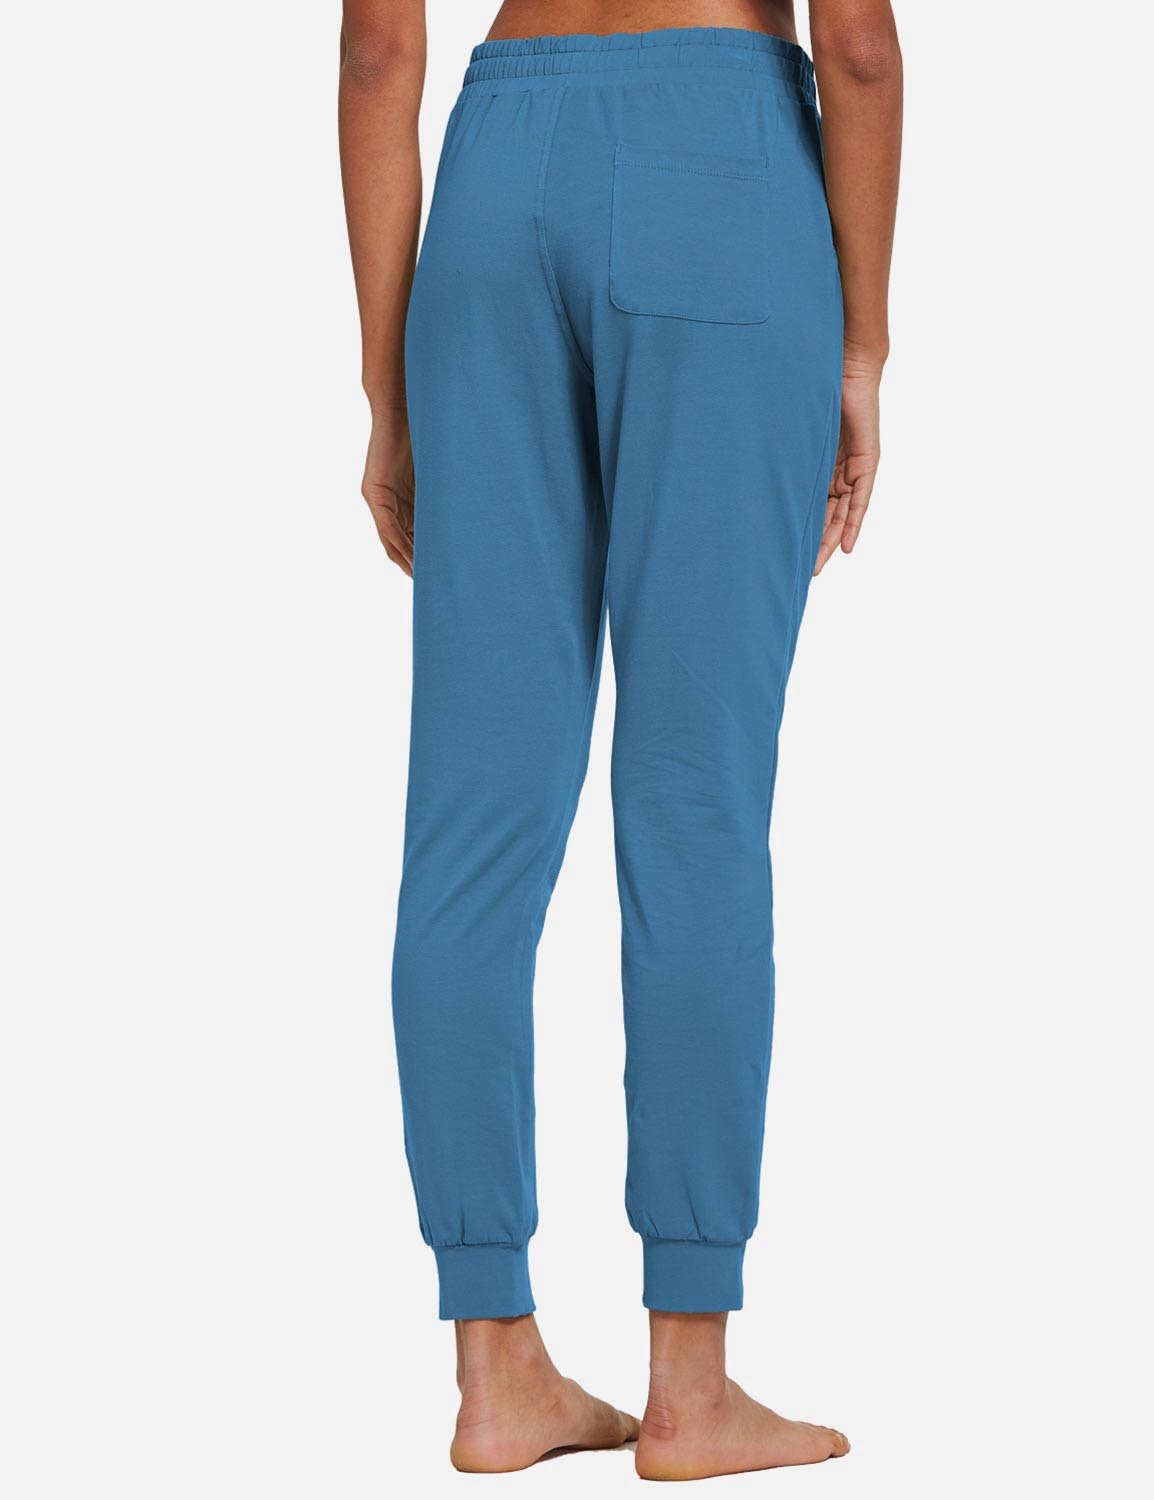 Baleaf Women's Cotton Comfy Pocketed & Tapered Weekend Joggers abh103 Sea Blue Back